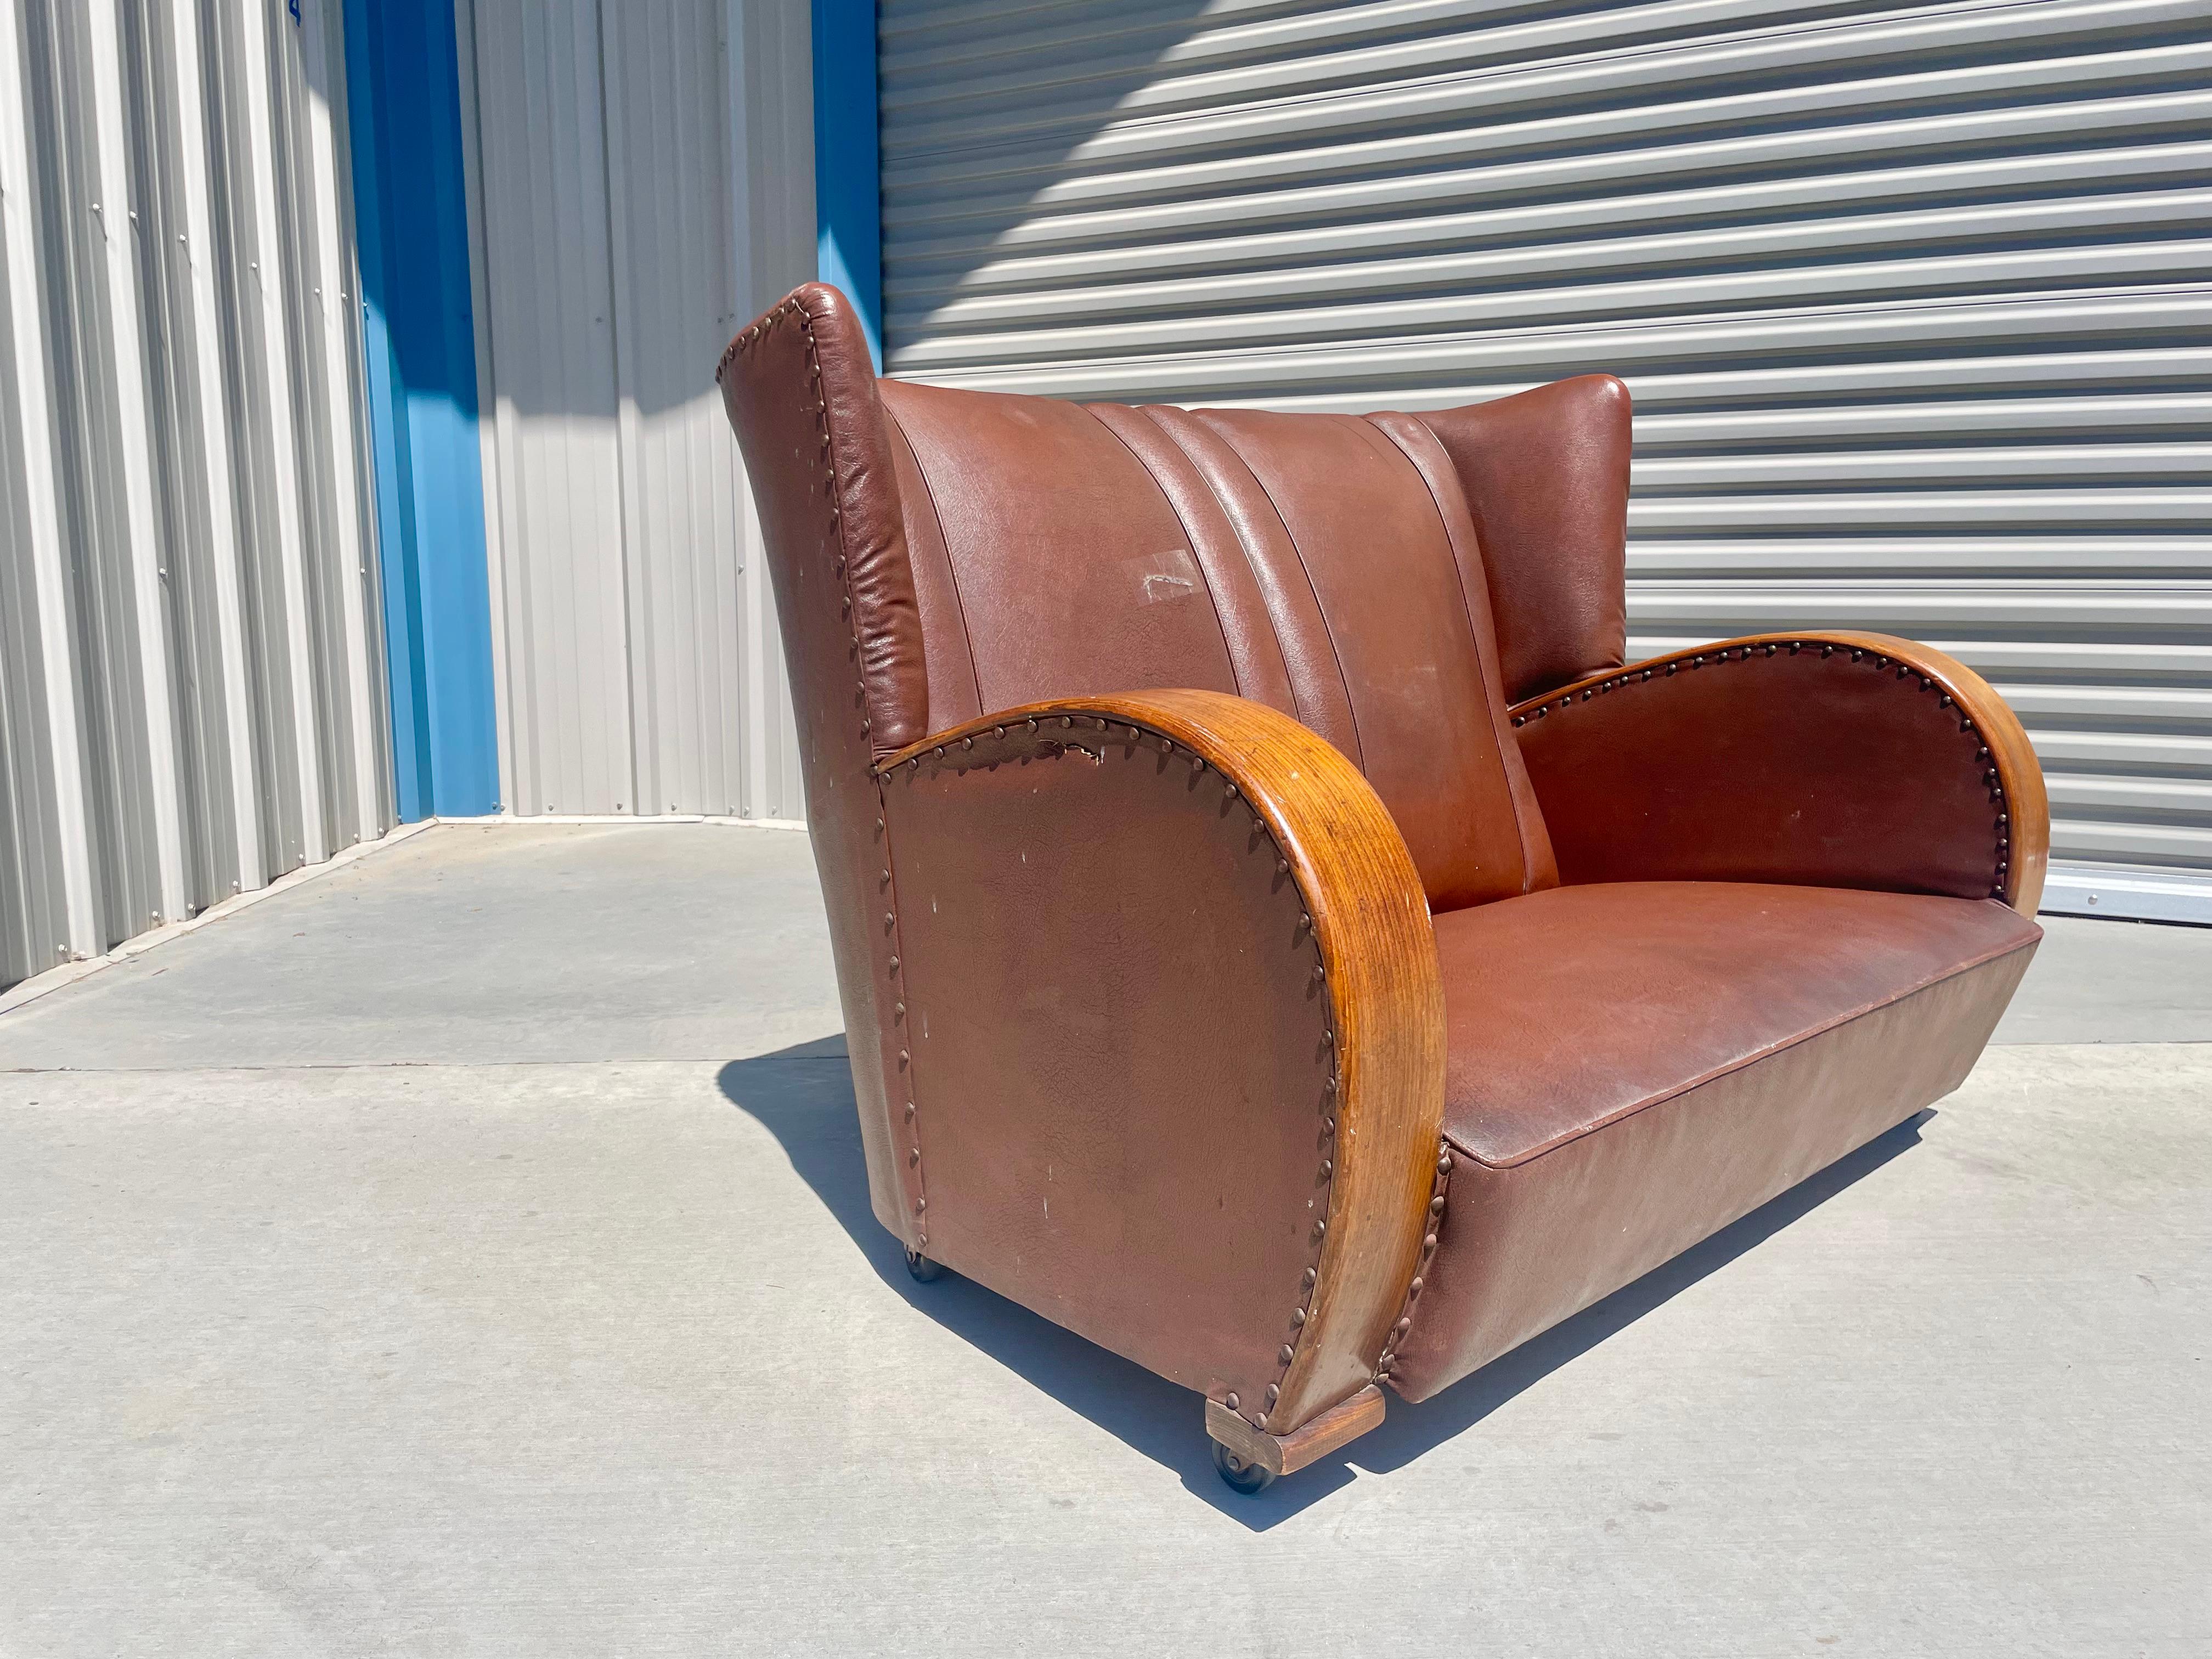 Vintage Art Deco Leather Loveseat In Fair Condition For Sale In North Hollywood, CA